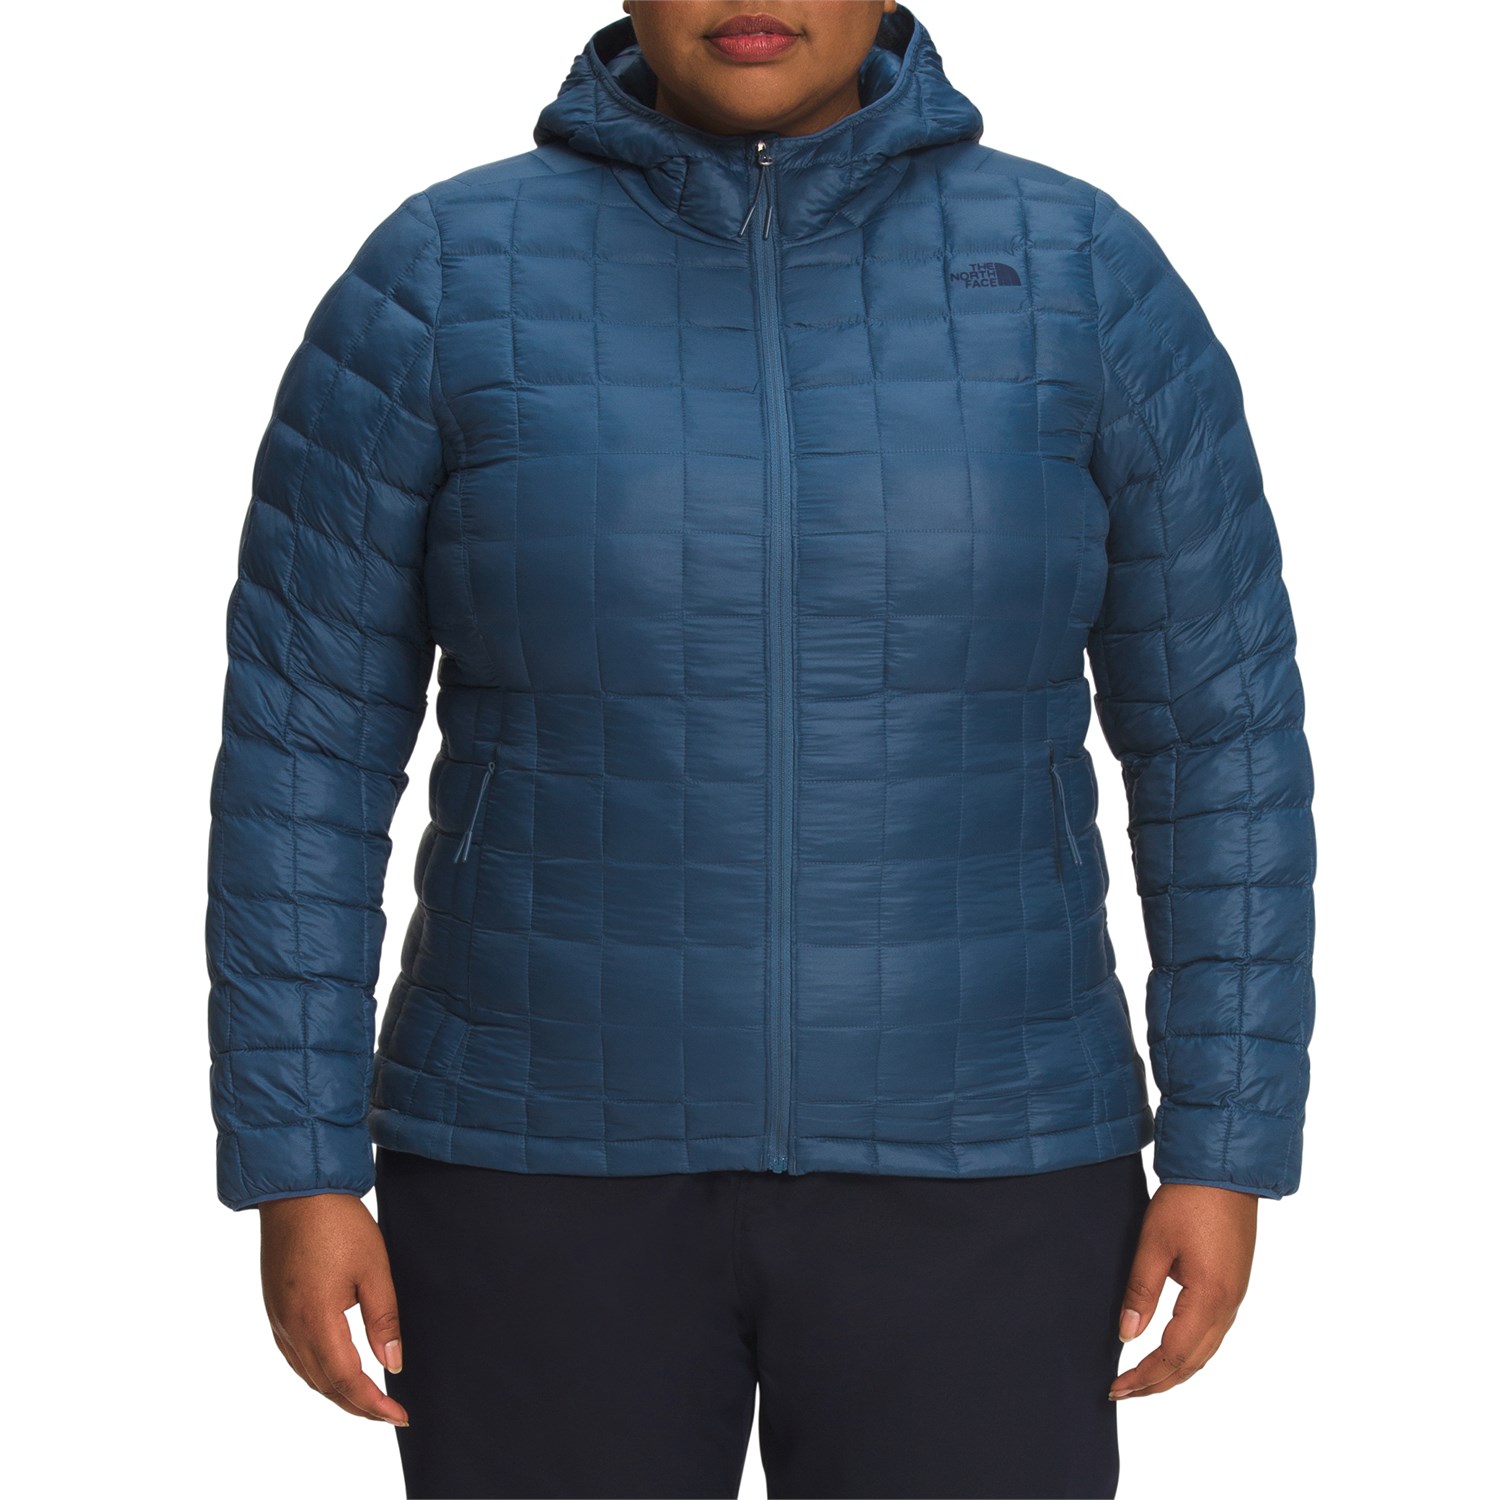 Худи The North Face ThermoBall Eco 2.0 Plus, цвет Shady Blue куртка the north face thermoball eco 2 0 plus цвет boysenberry